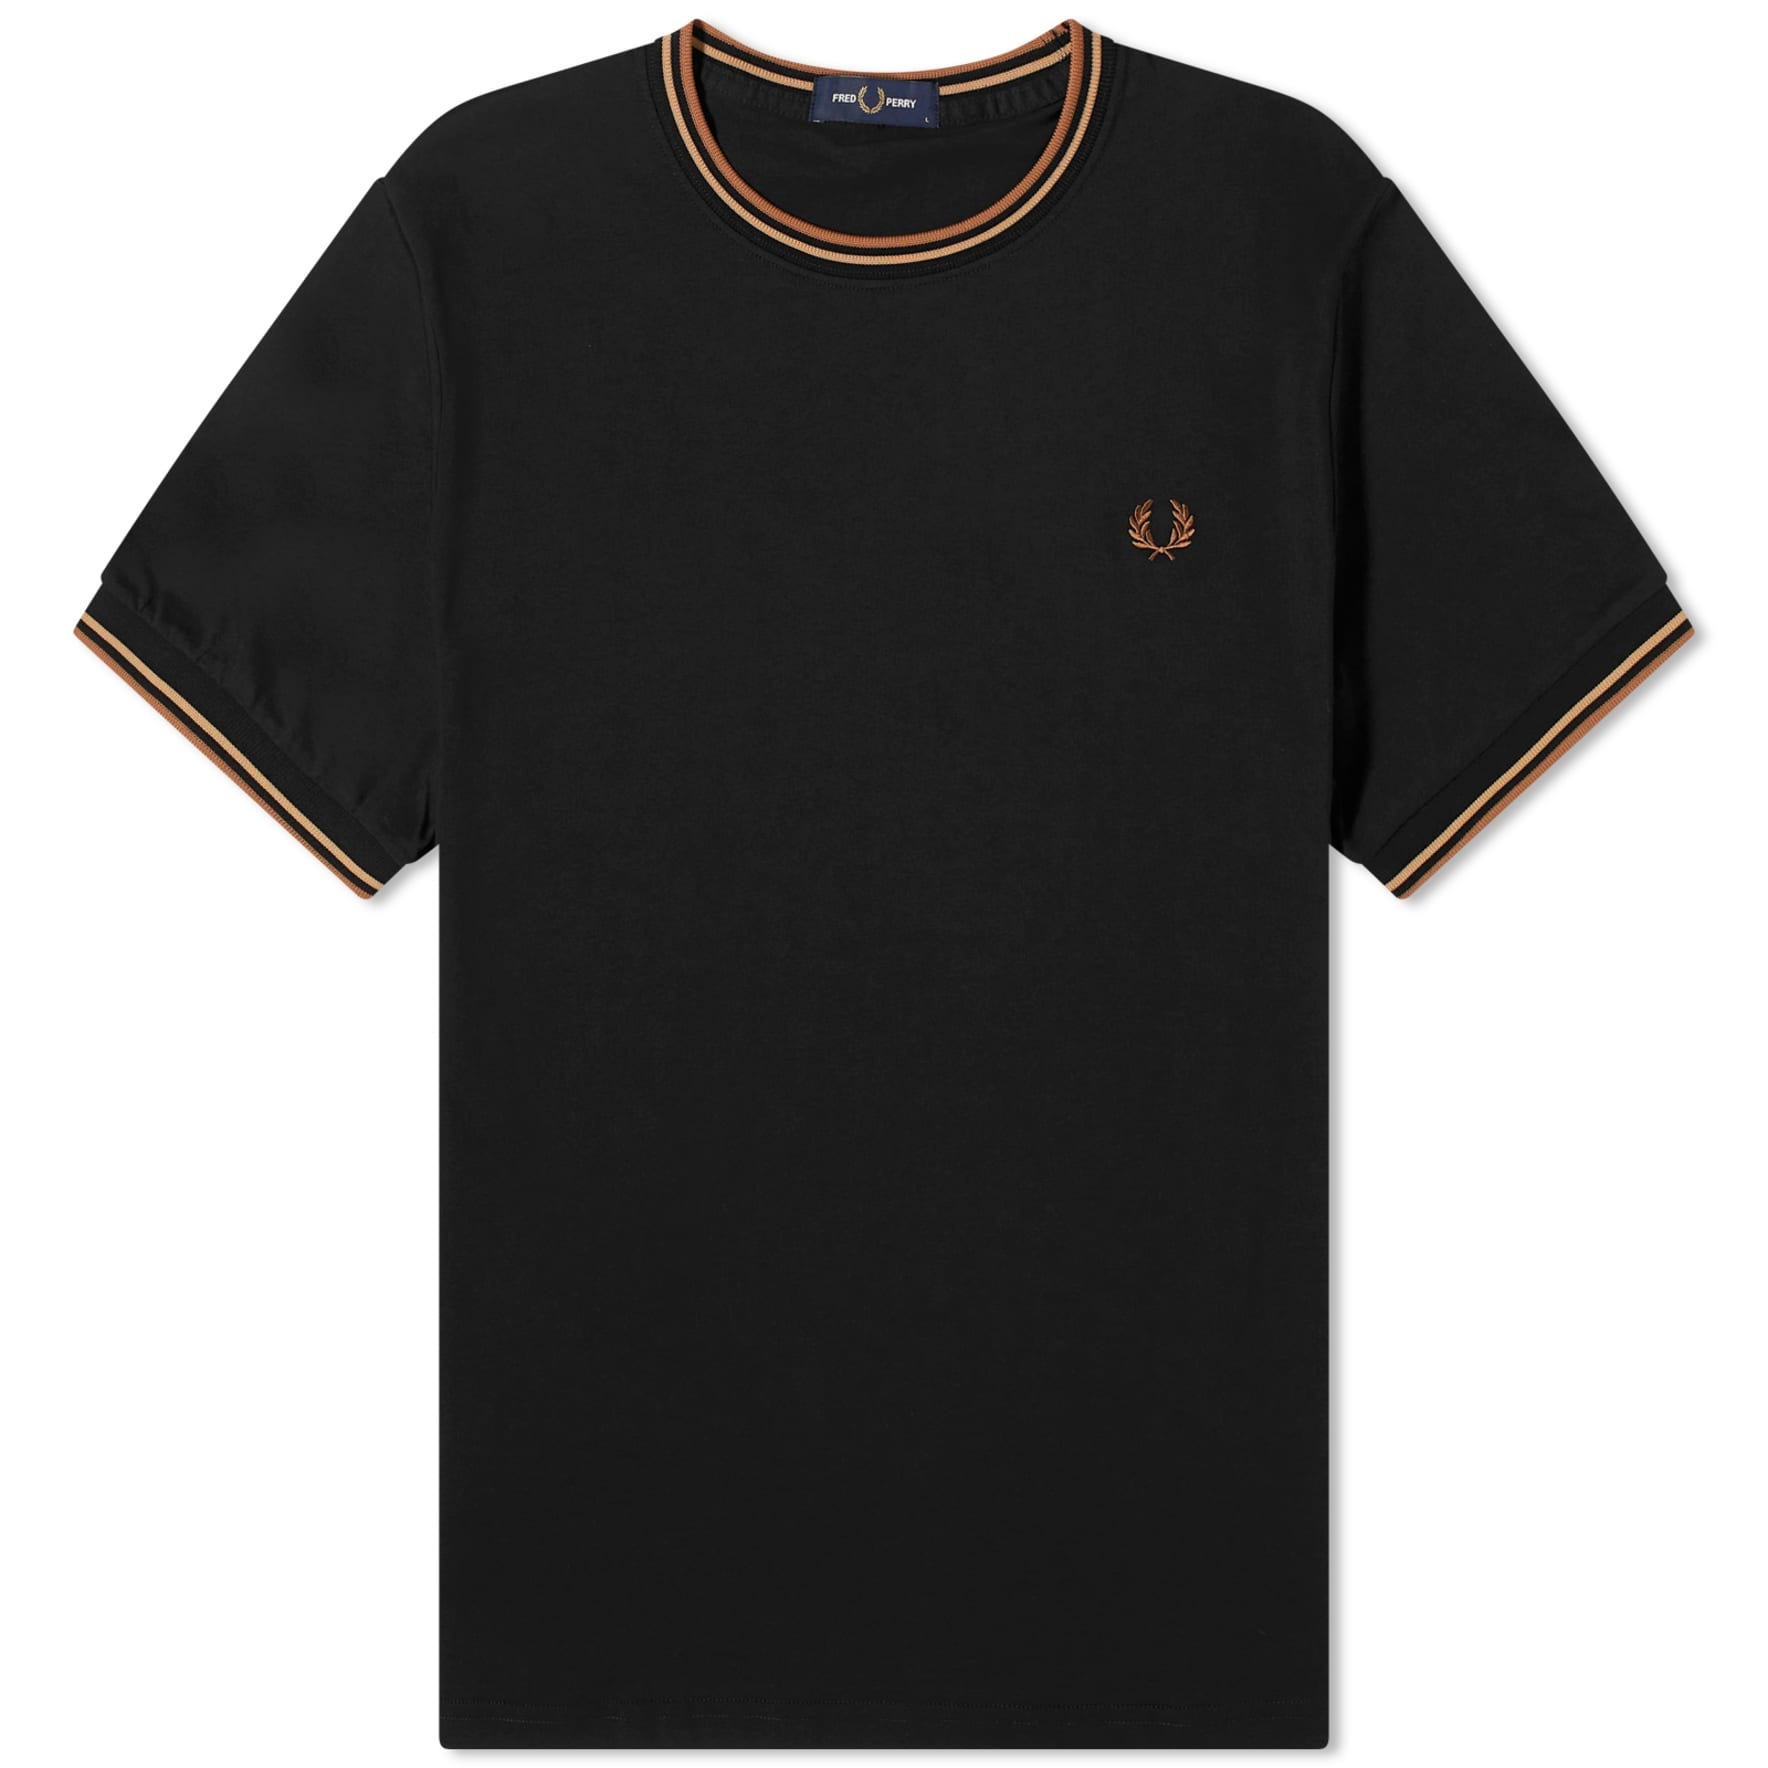 Футболка Fred Perry Twin Tipped, черный футболка fred perry authentic twin tipped бордовый